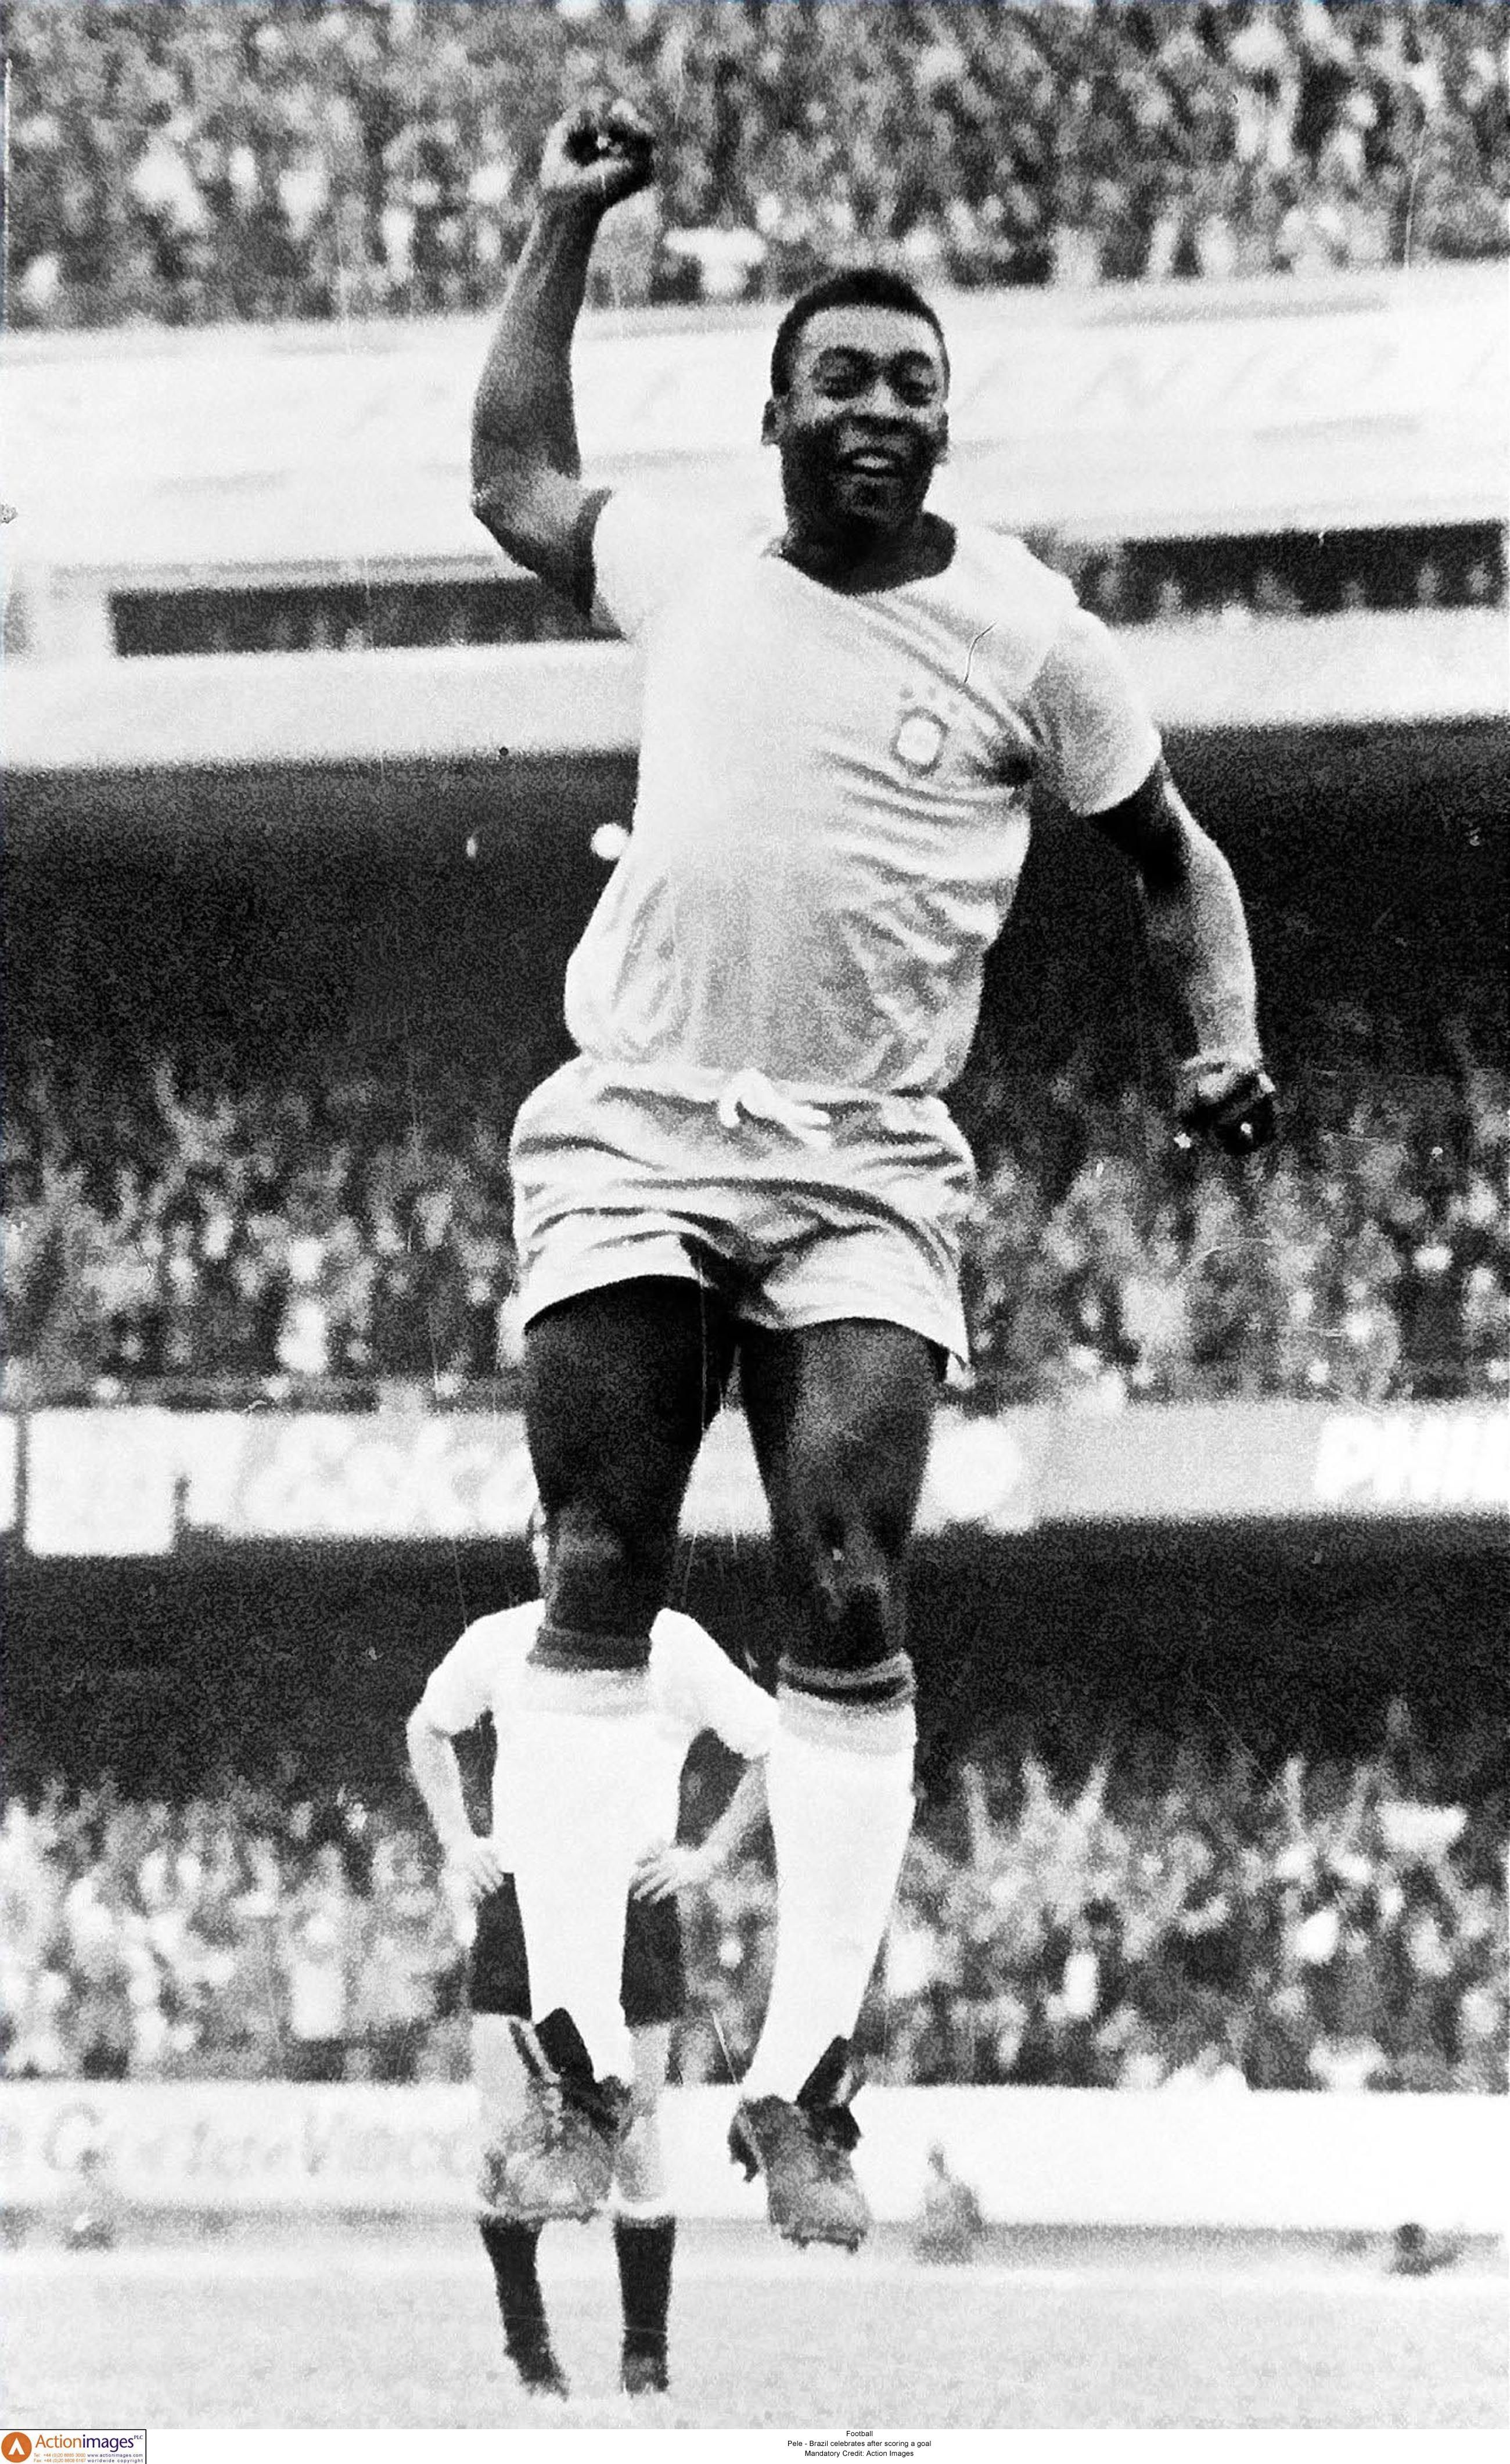 Pele's best ever goal had to be digitally created and it was truly special